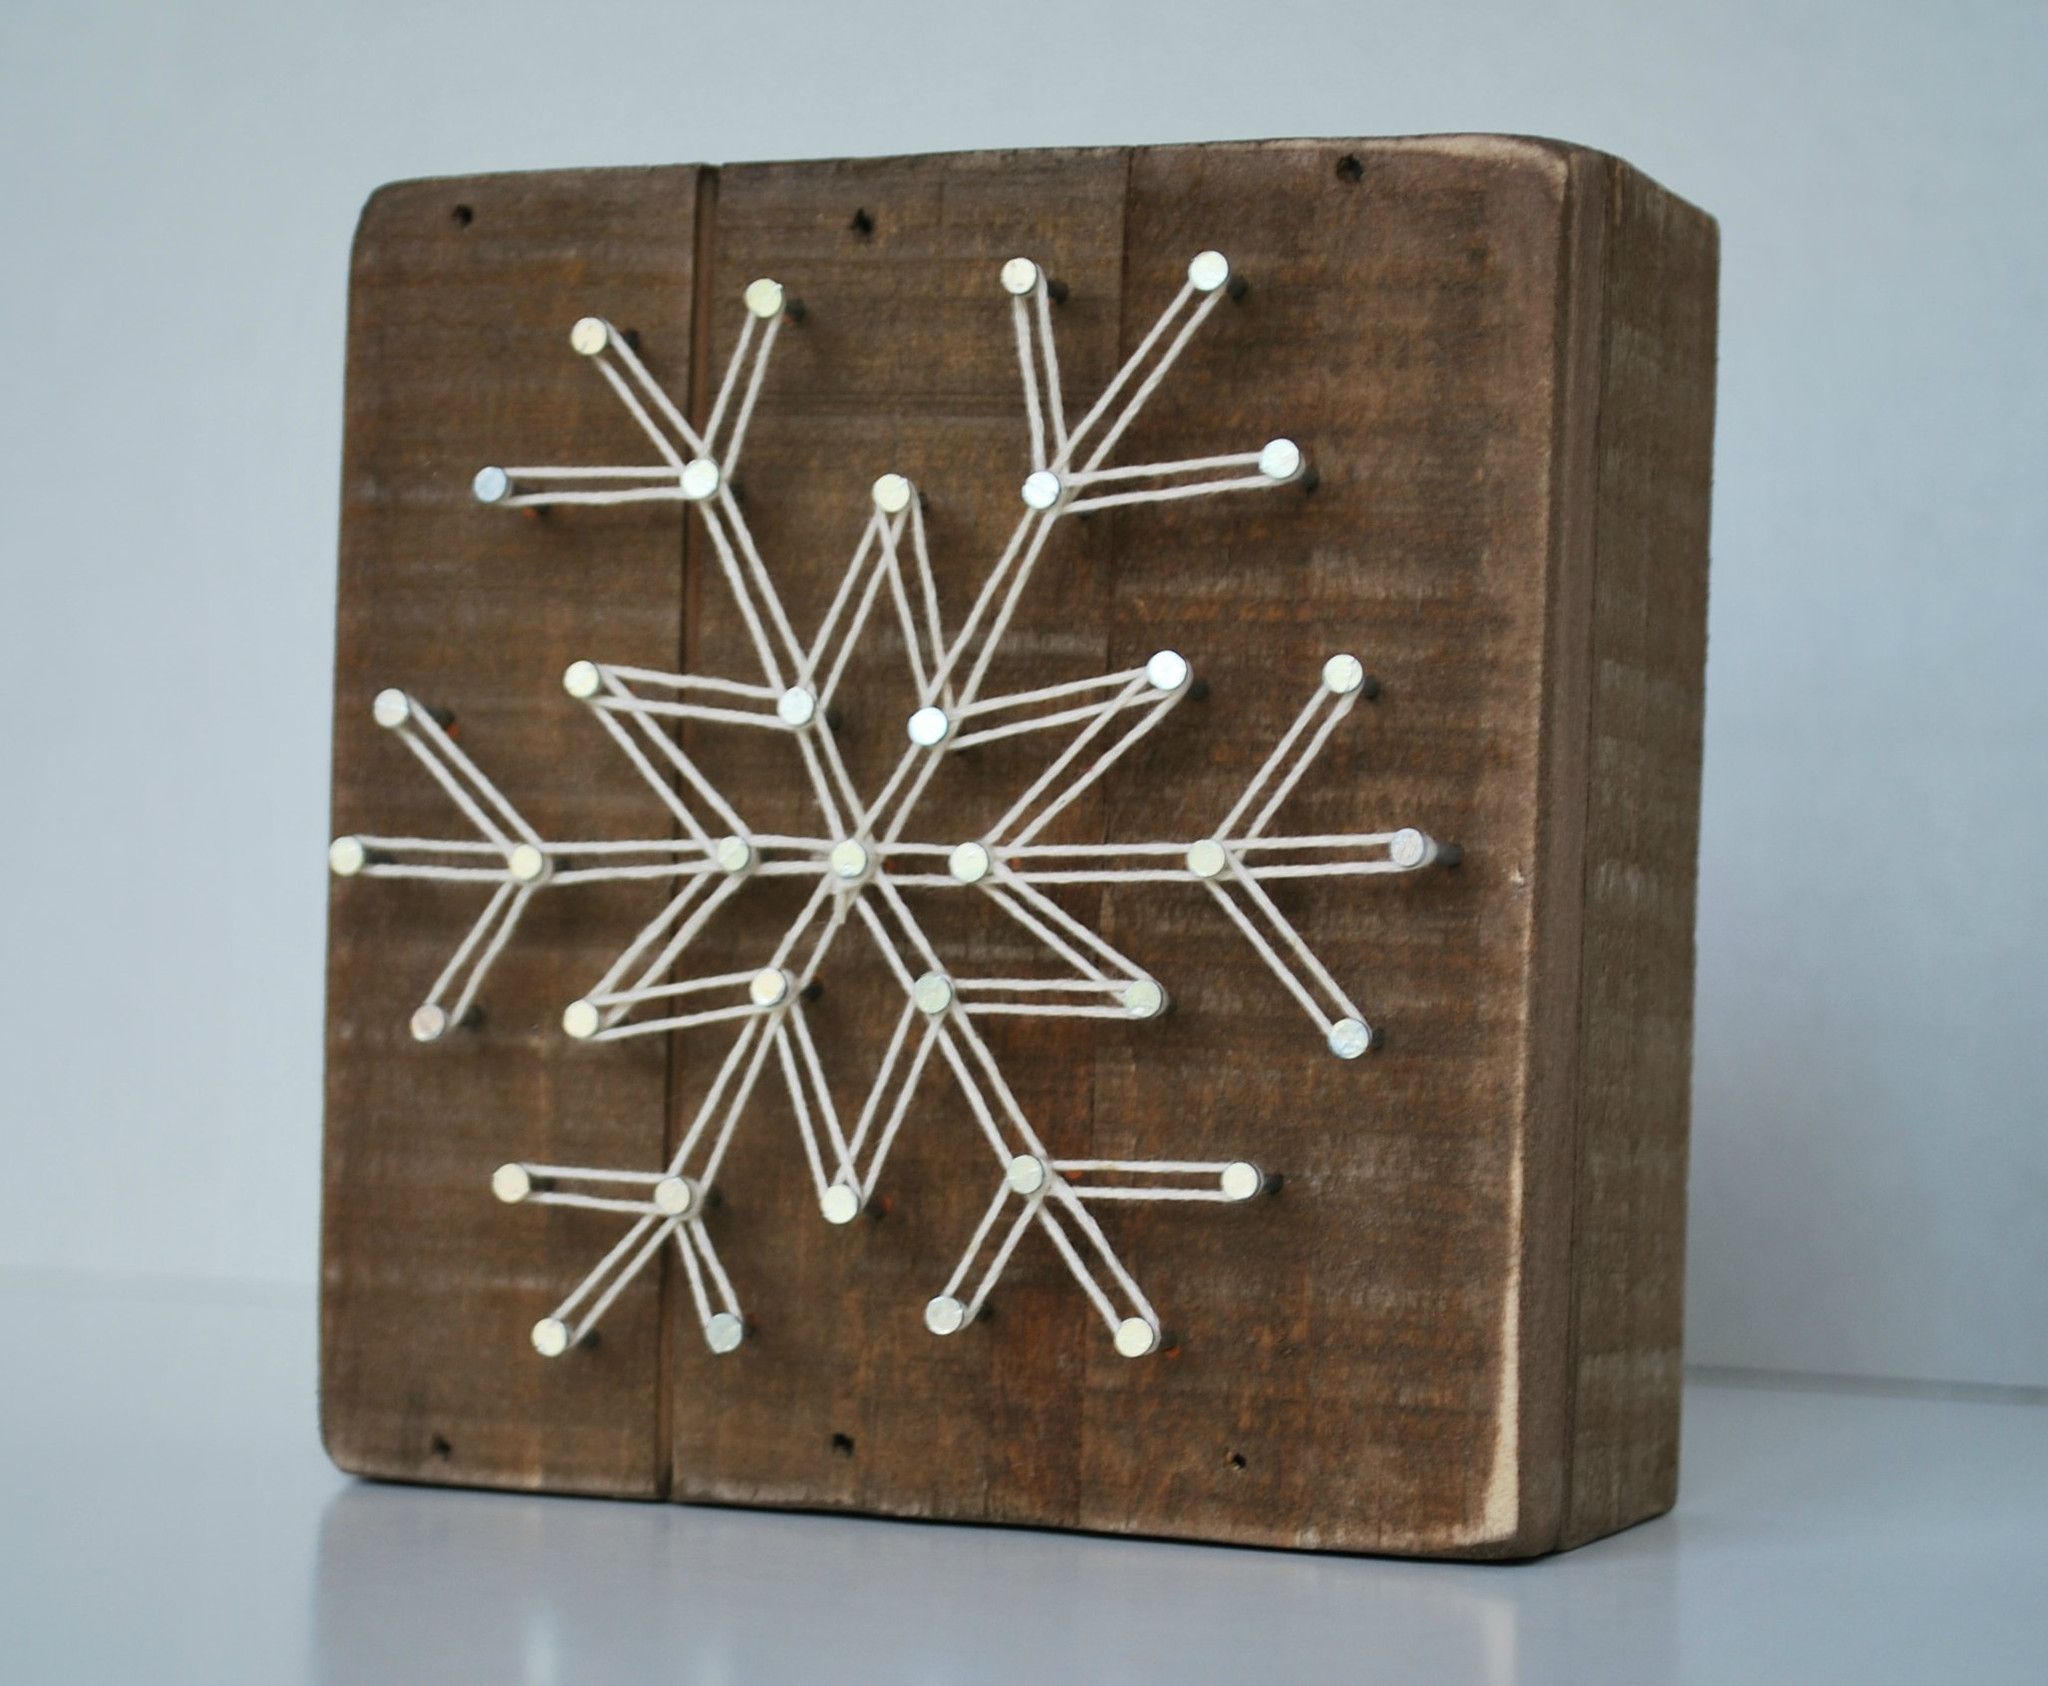 Who doesnt love the beauty of a snowflake? This snowflake measures 4.5″